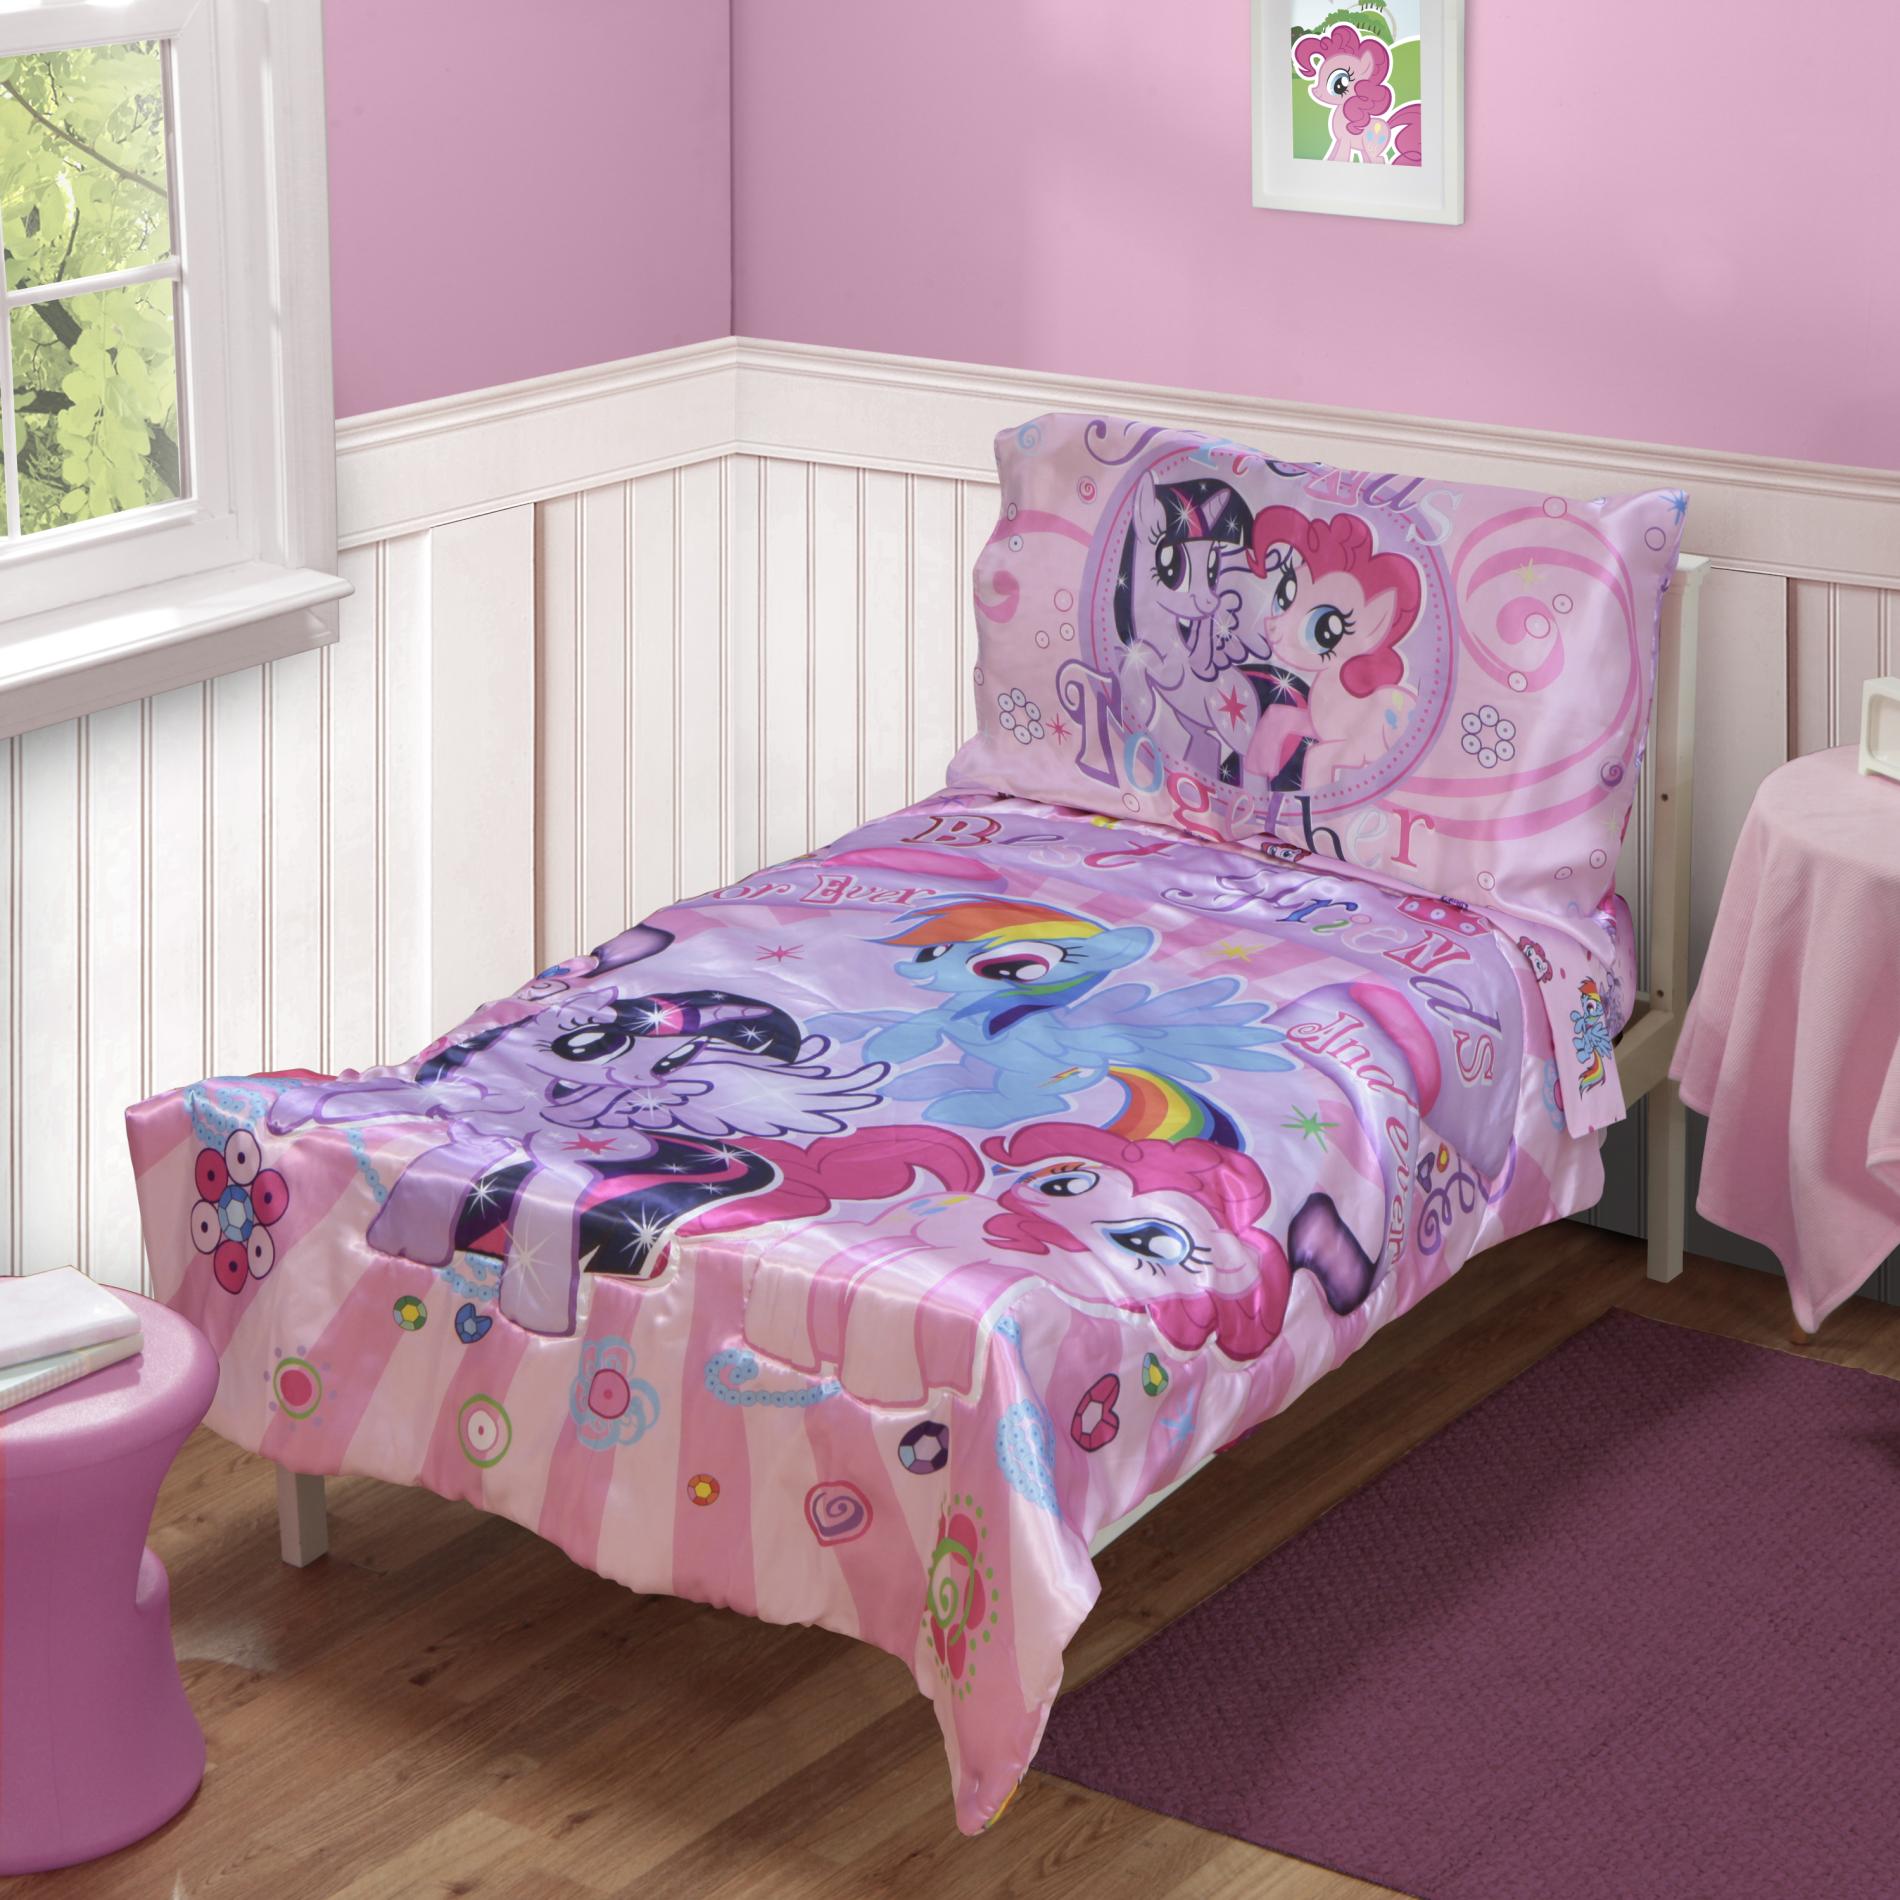 My Little Pony 4Piece Toddler Girl's Bed Set Baby Baby Bedding Bedding Sets & Collections